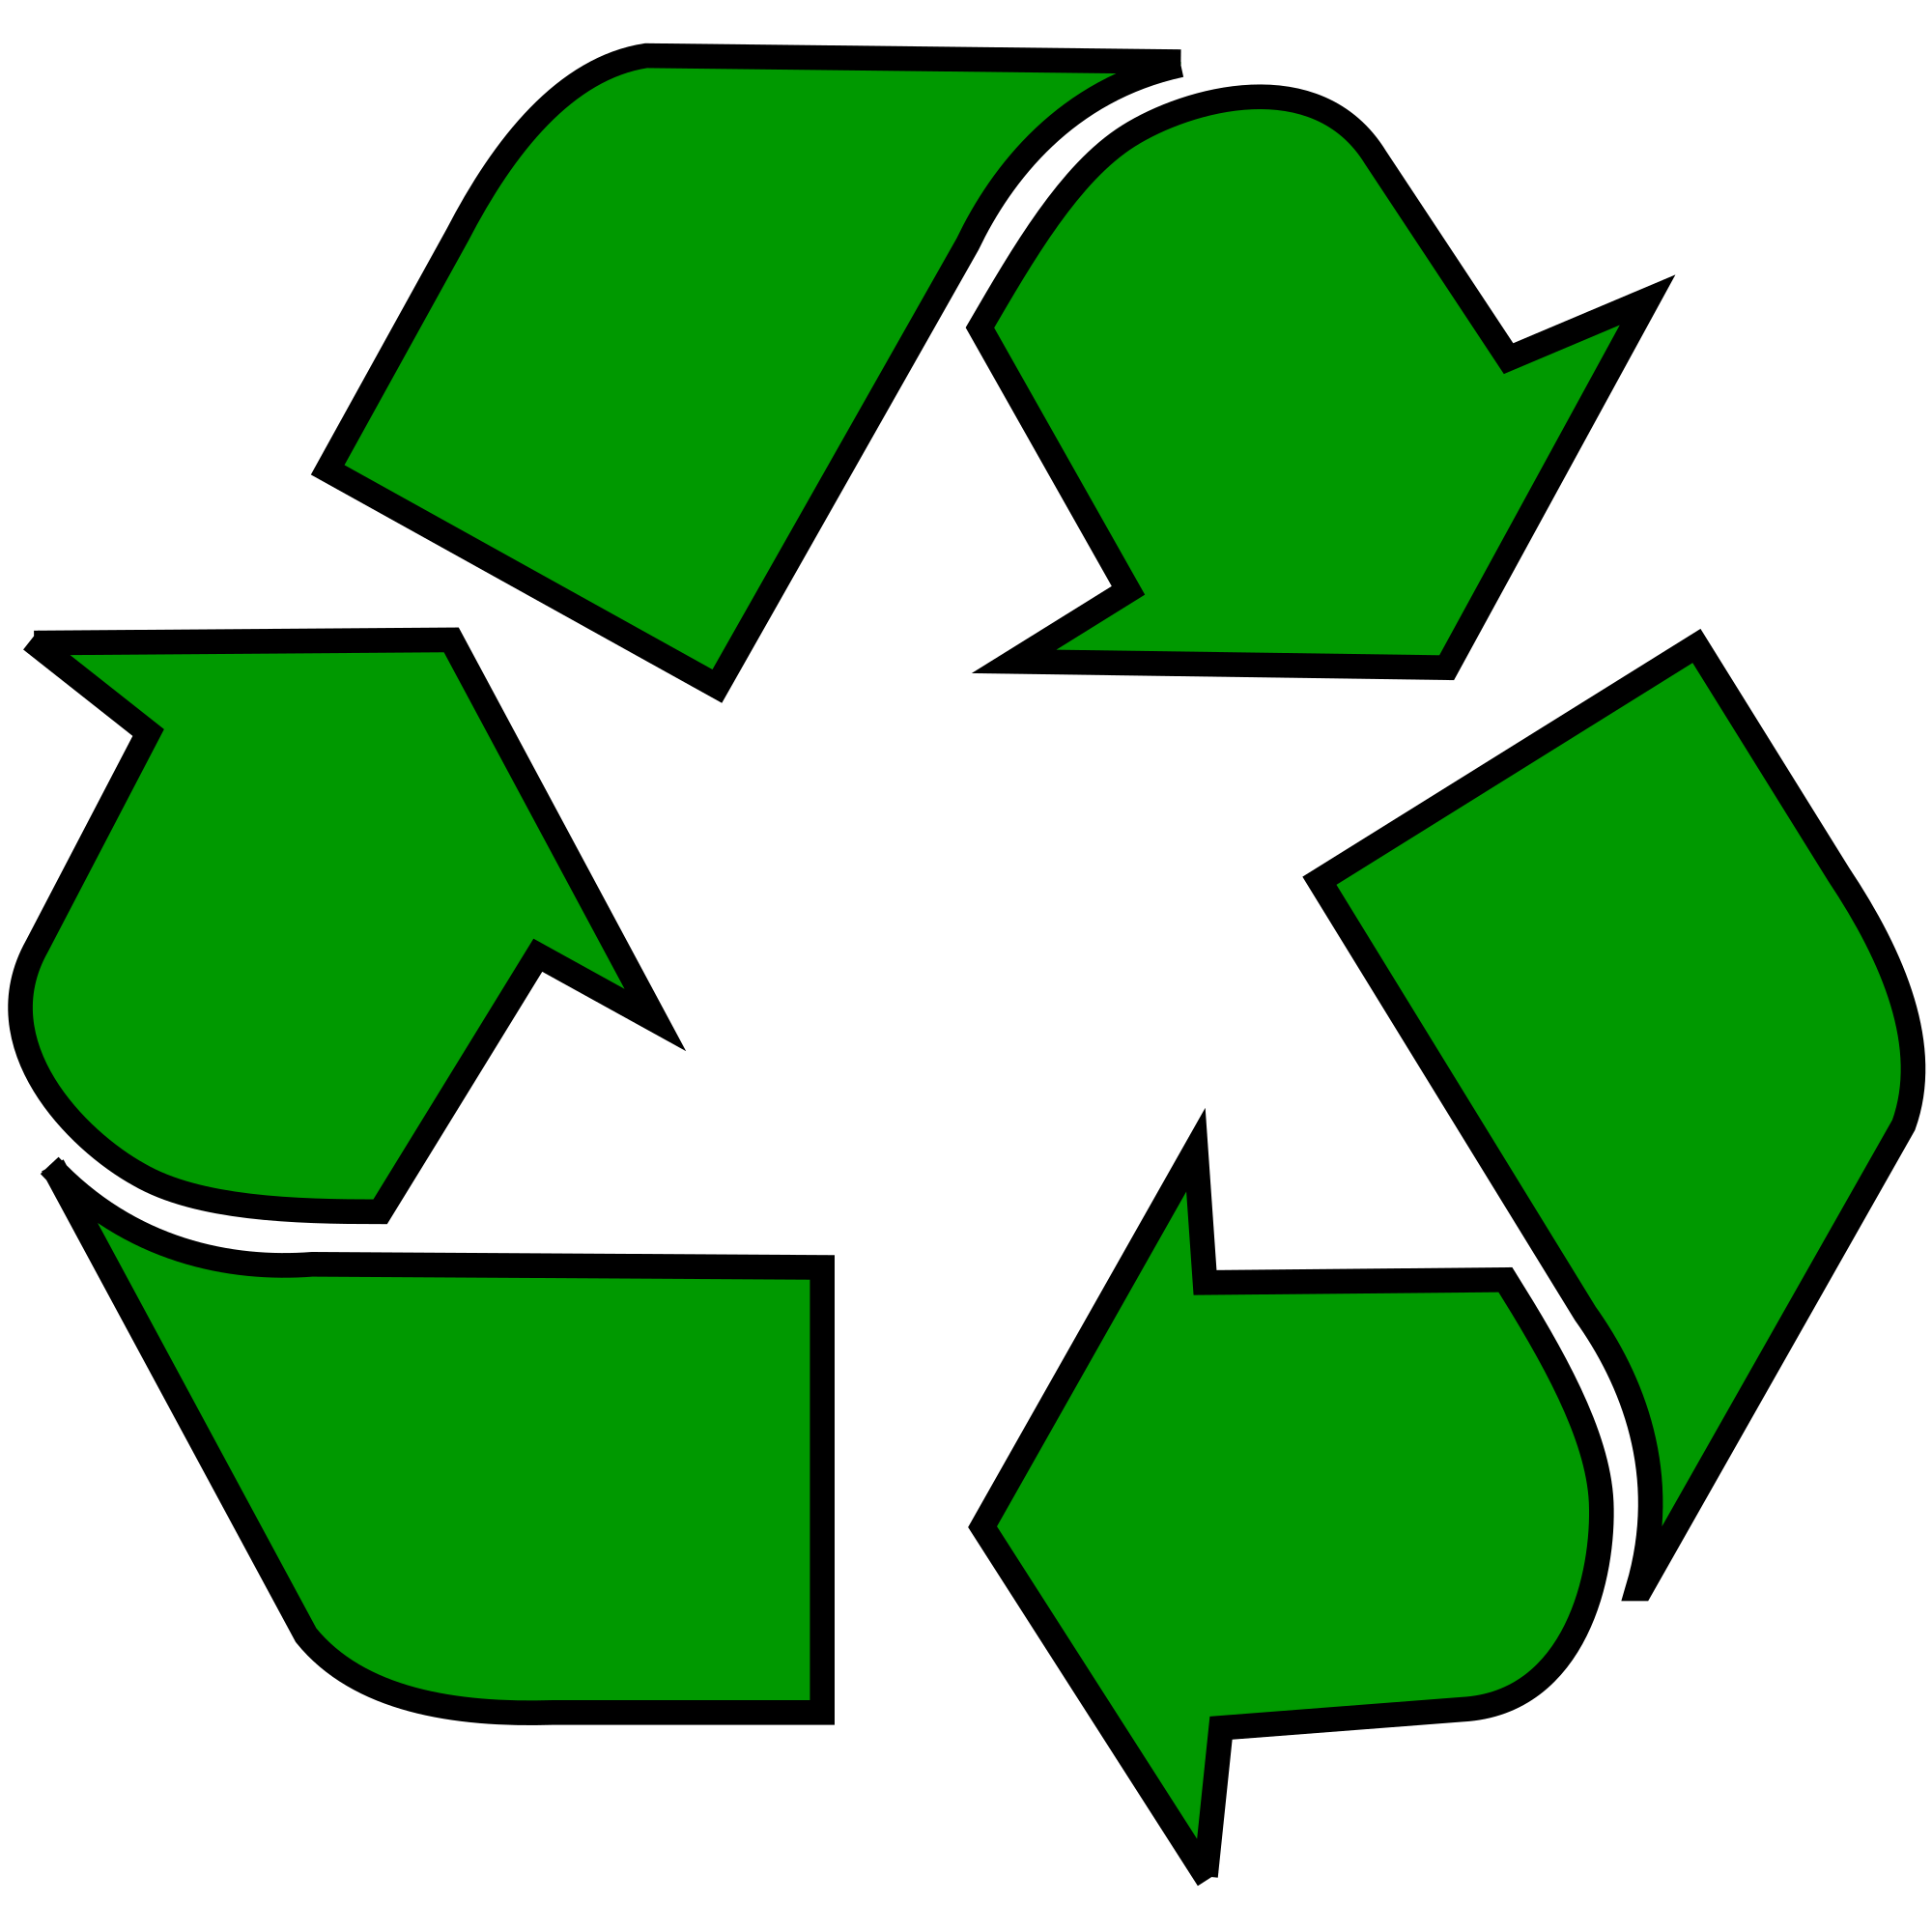 Please Recycle Logo - Recycling symbol